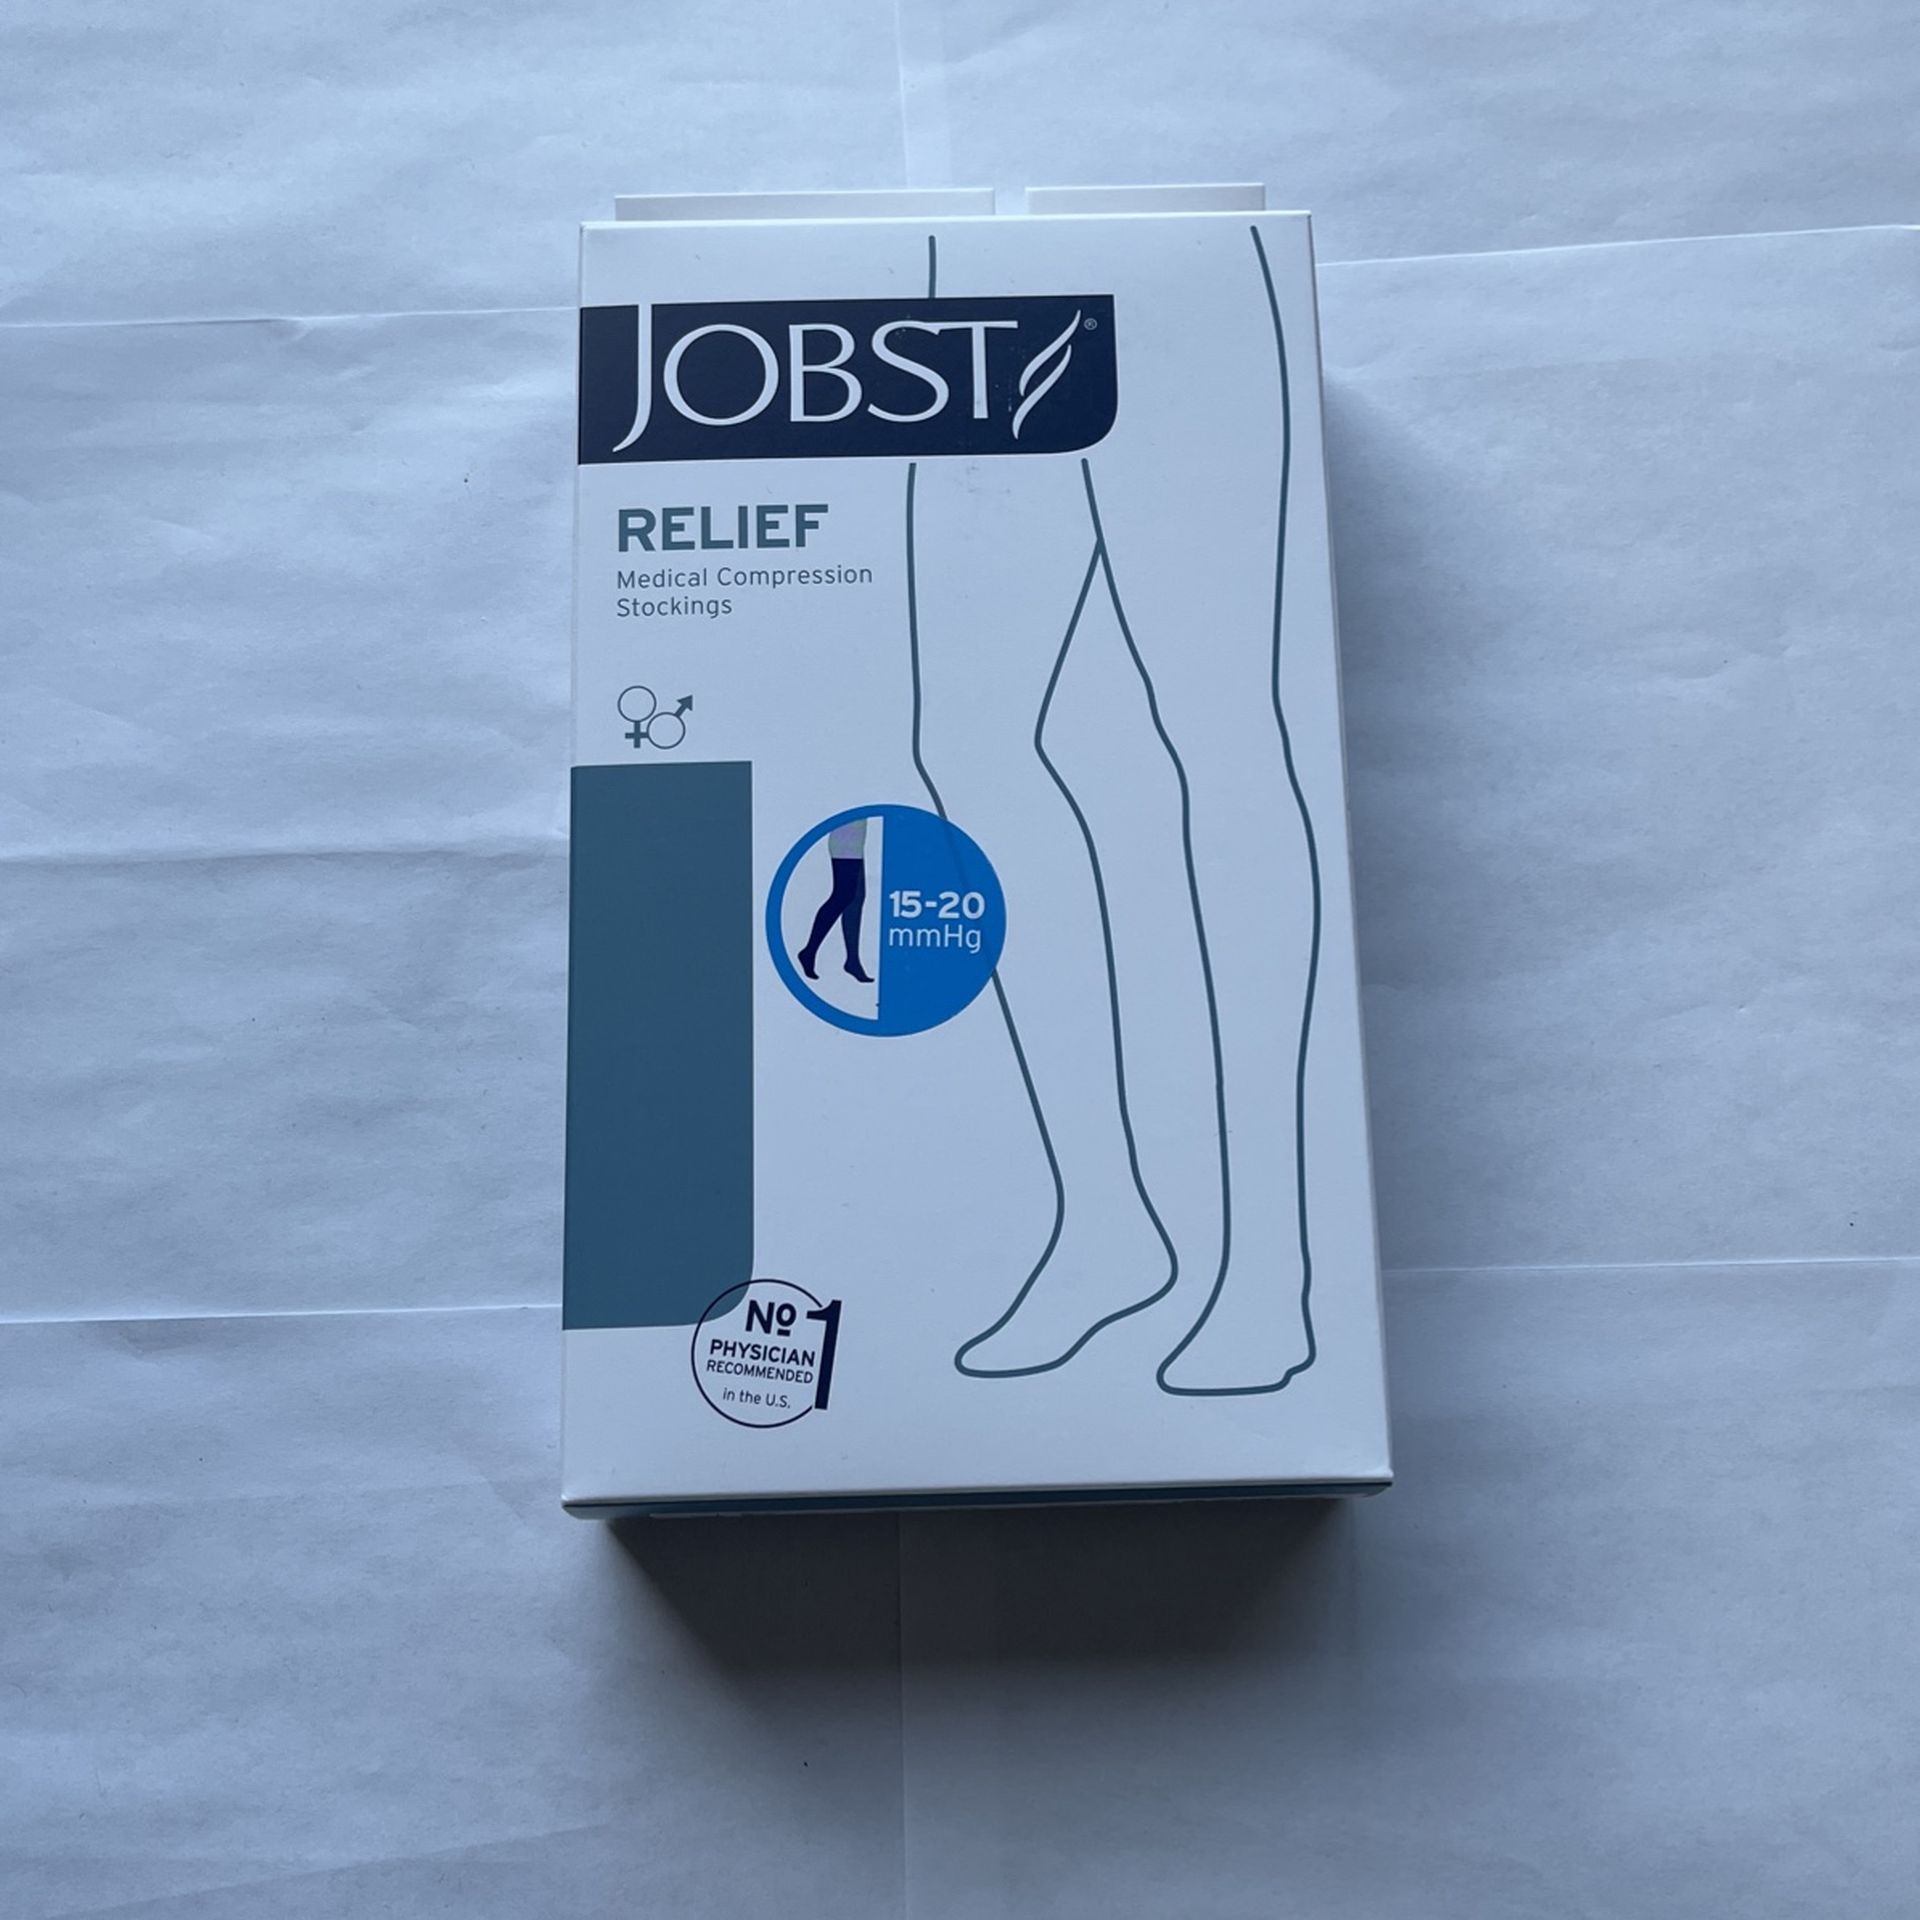 Jobst Relief Medical Compression Stockings